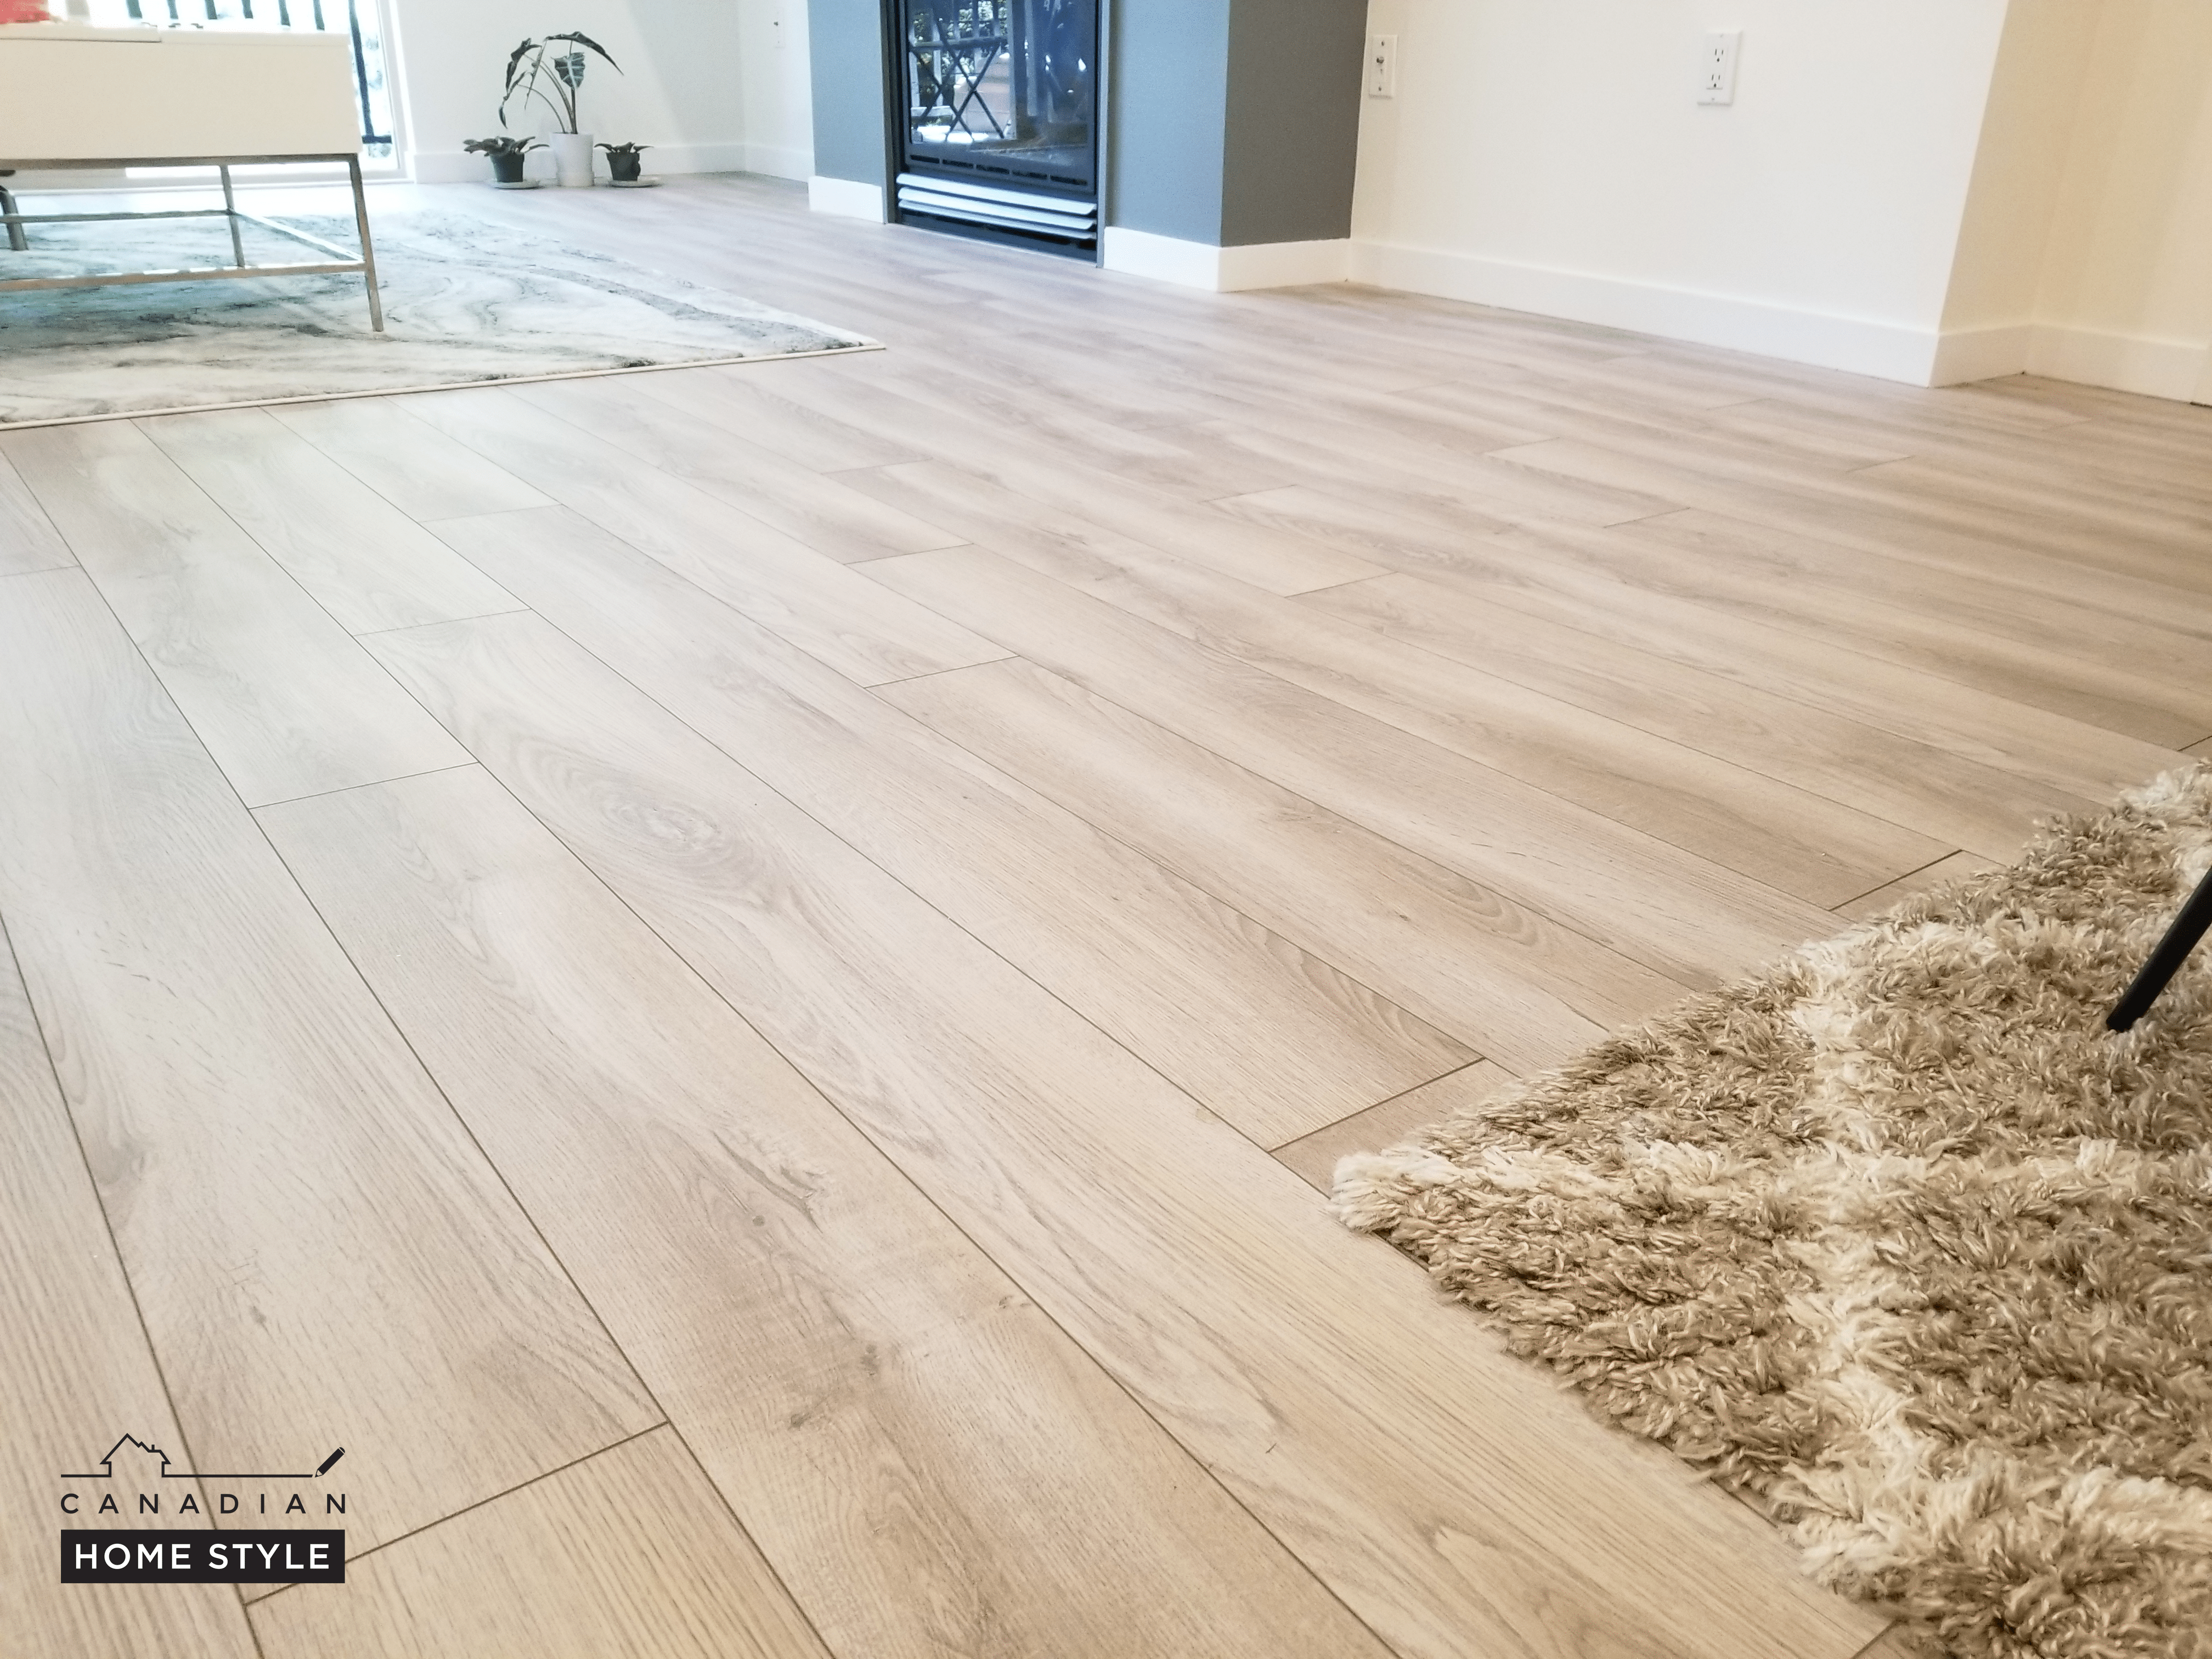 Laminate floor maintenance tips for Vancouver residents